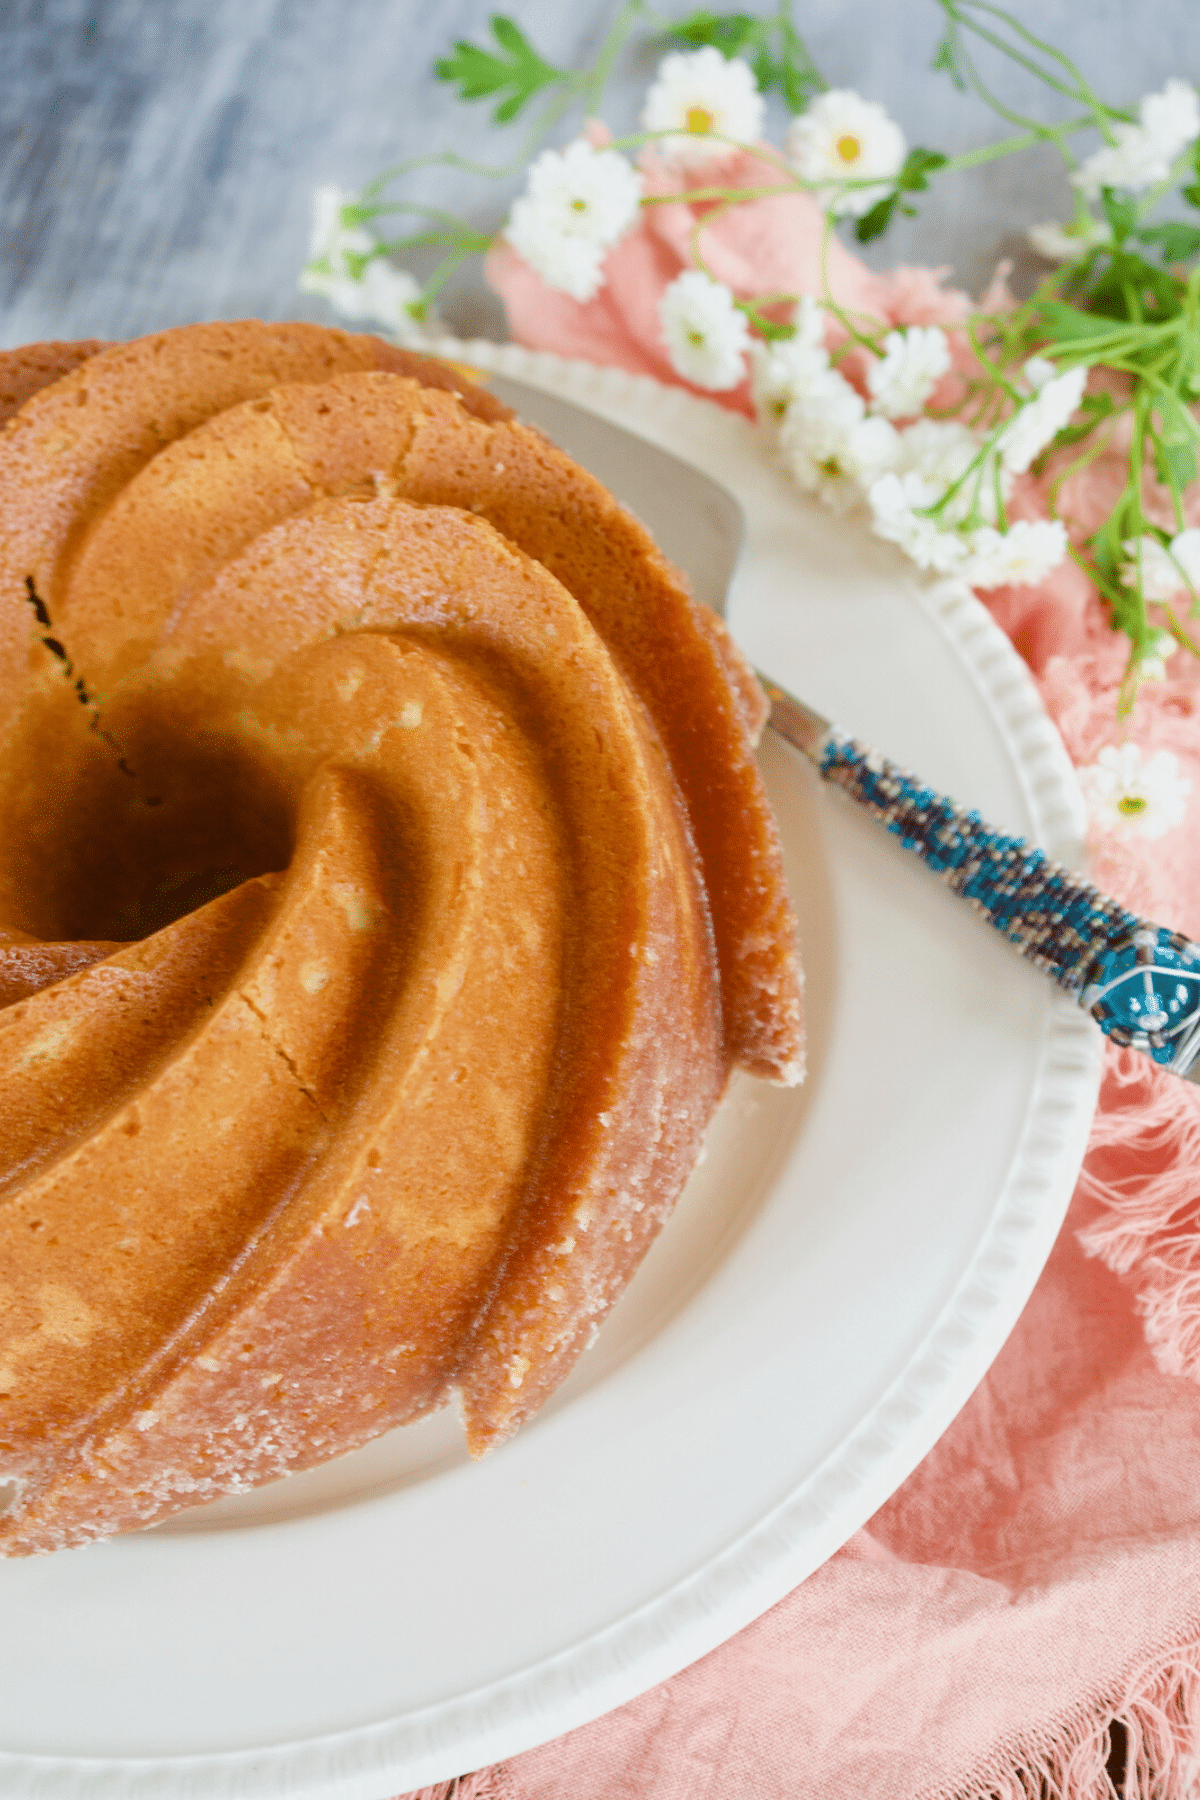 Old fashioned butter pound cake recipe on platter.